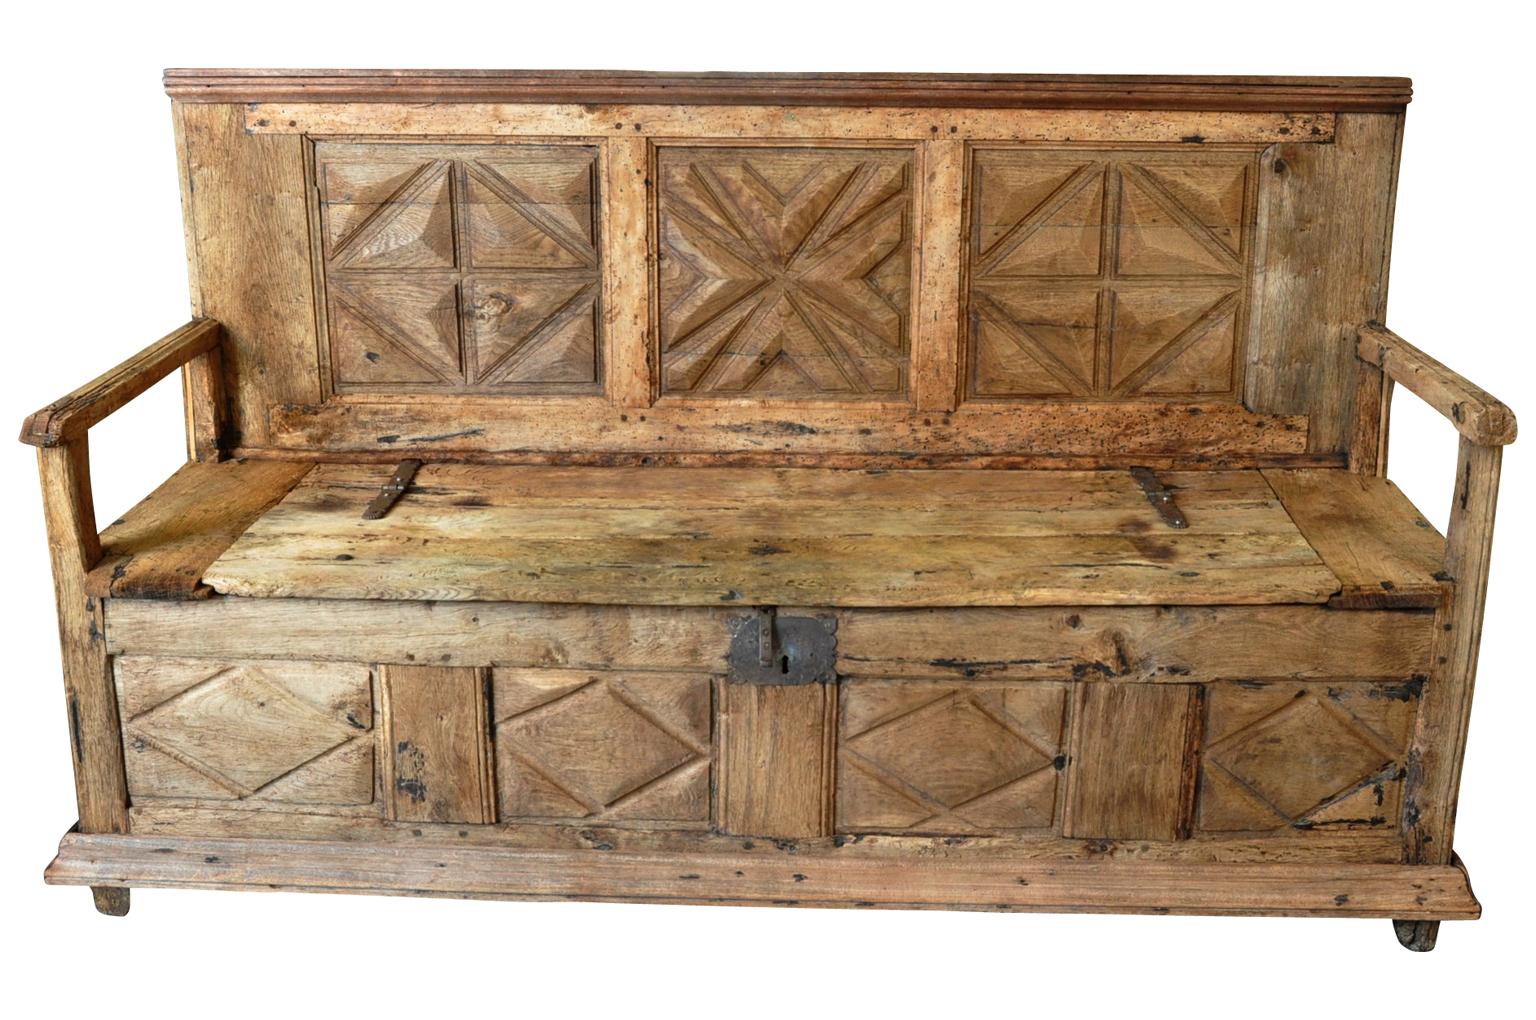 A very handsome and Primitive Louis XIII style bench. Wonderfully constructed from washed oak with a beautiful carved paneled back with lifting seat. Great storage.